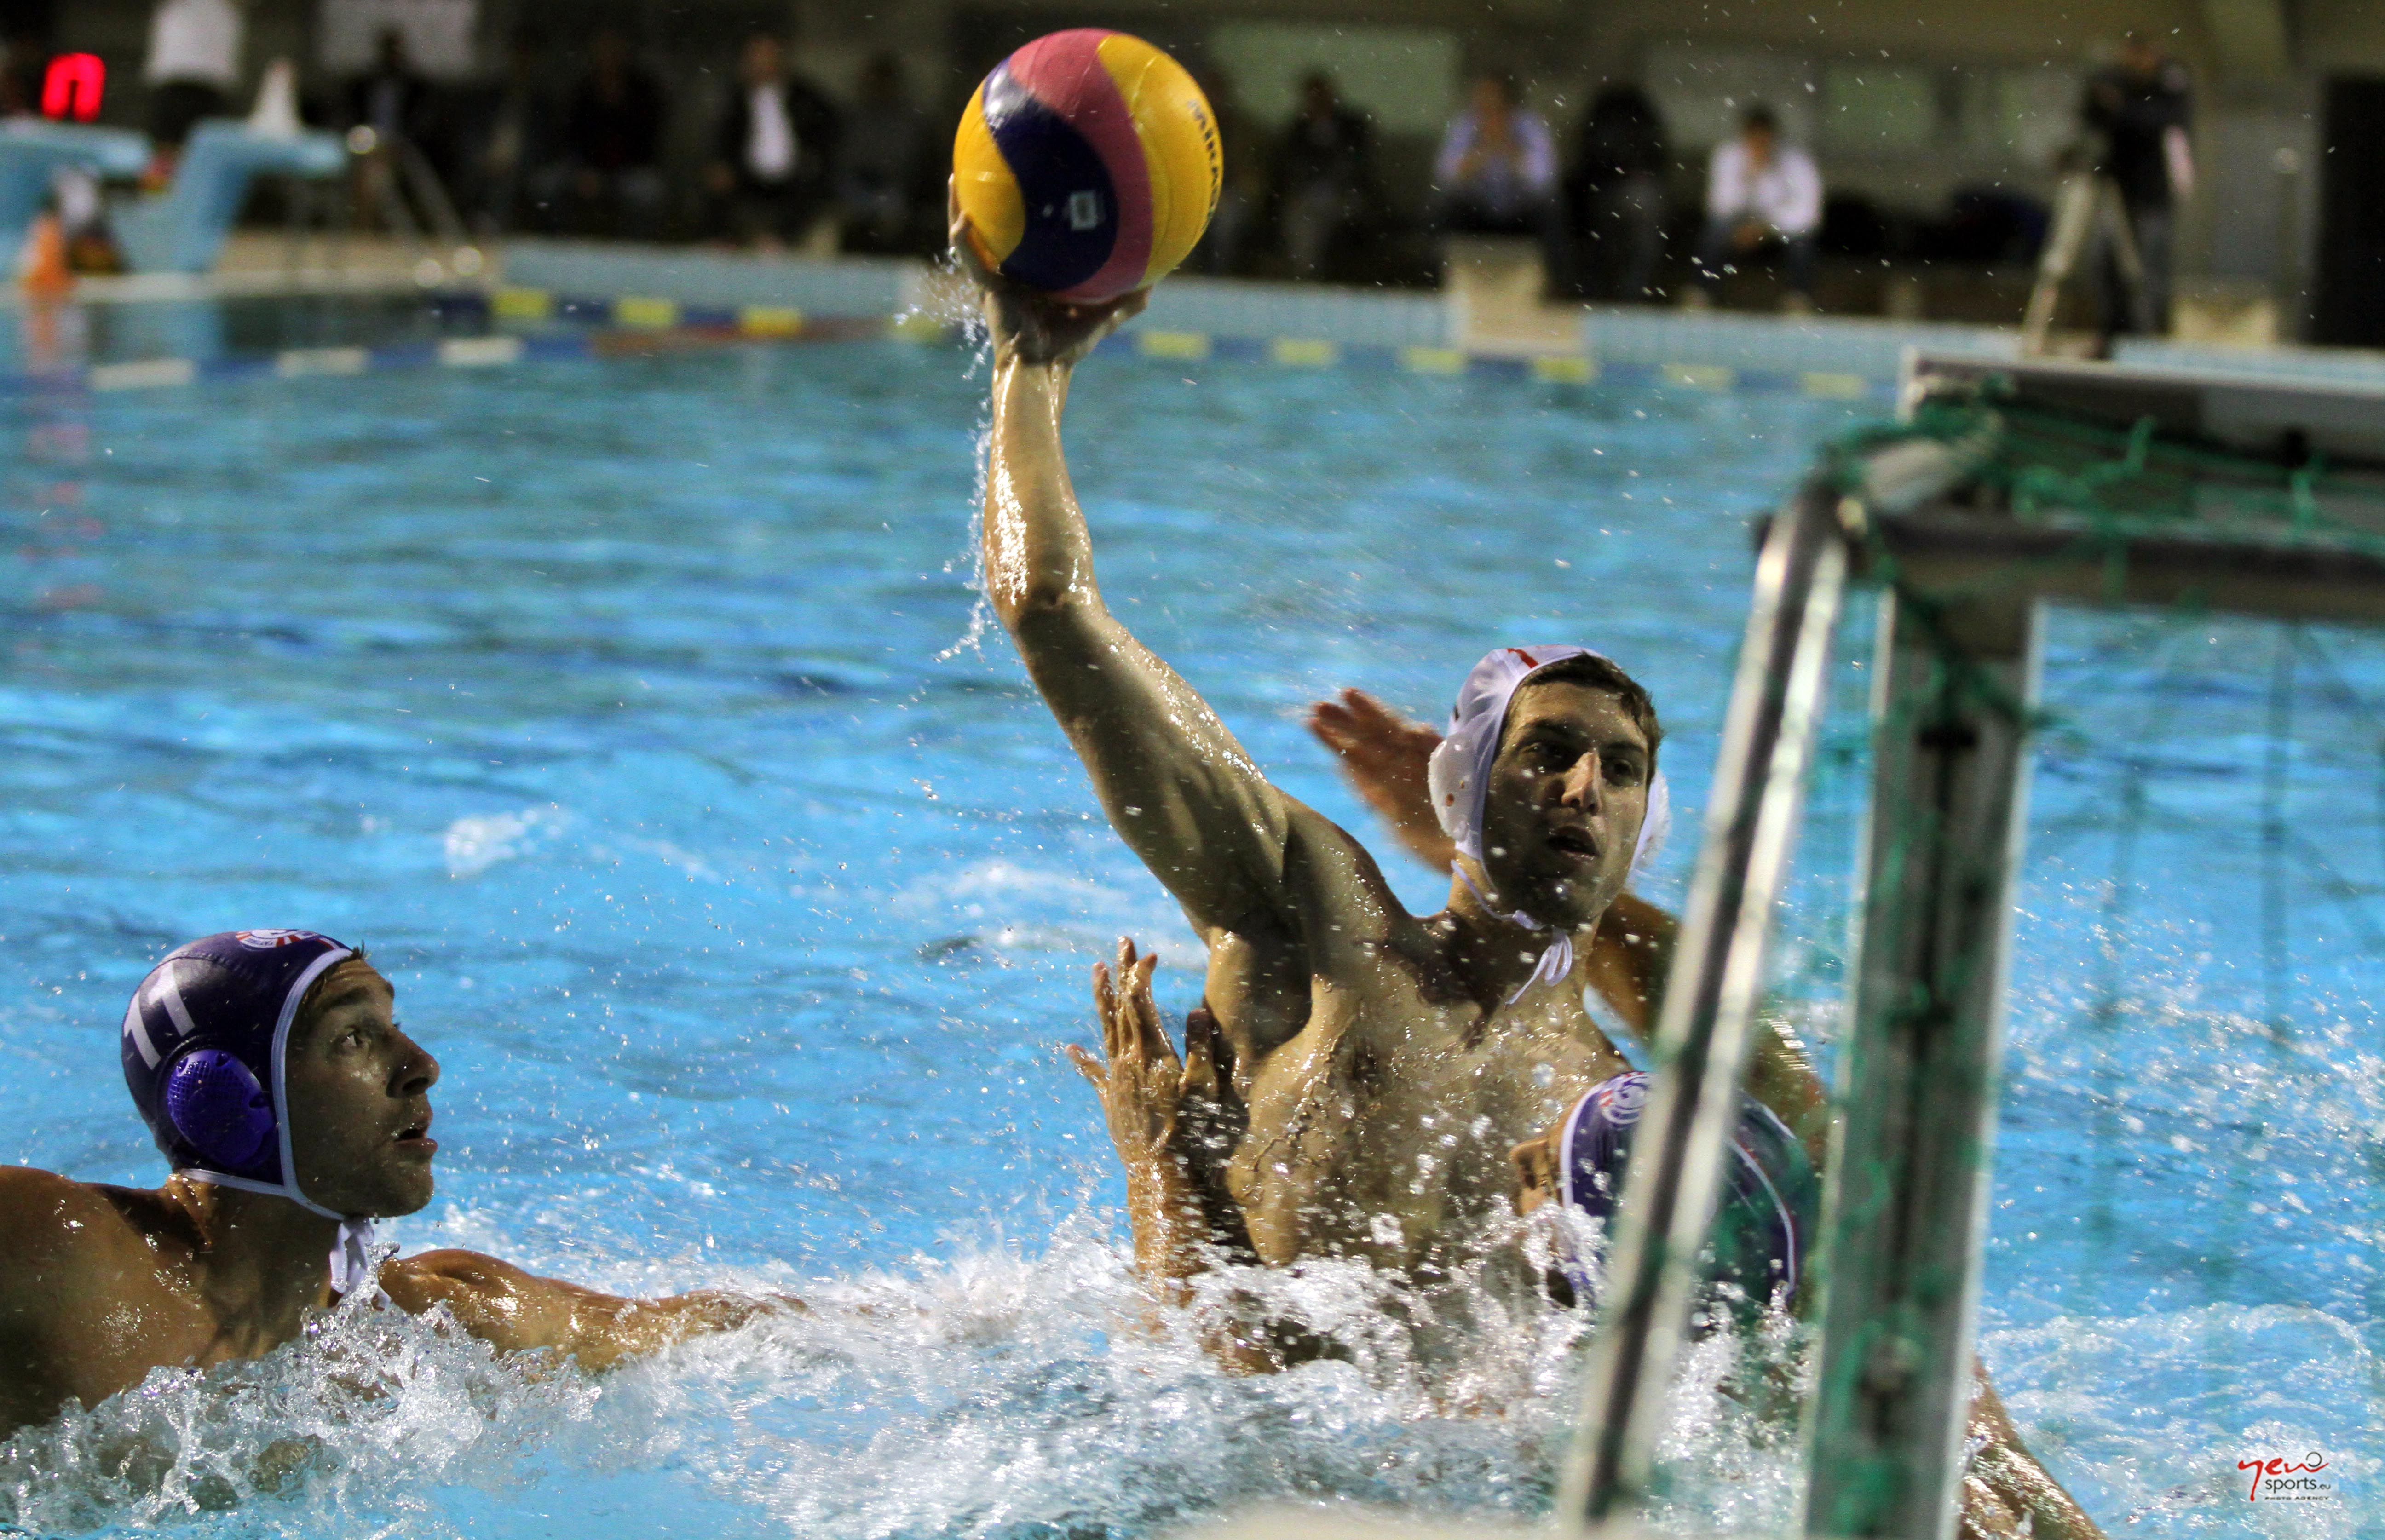 Photostory from the Men's Waterpolo Greek Cup Final: Olympiacos